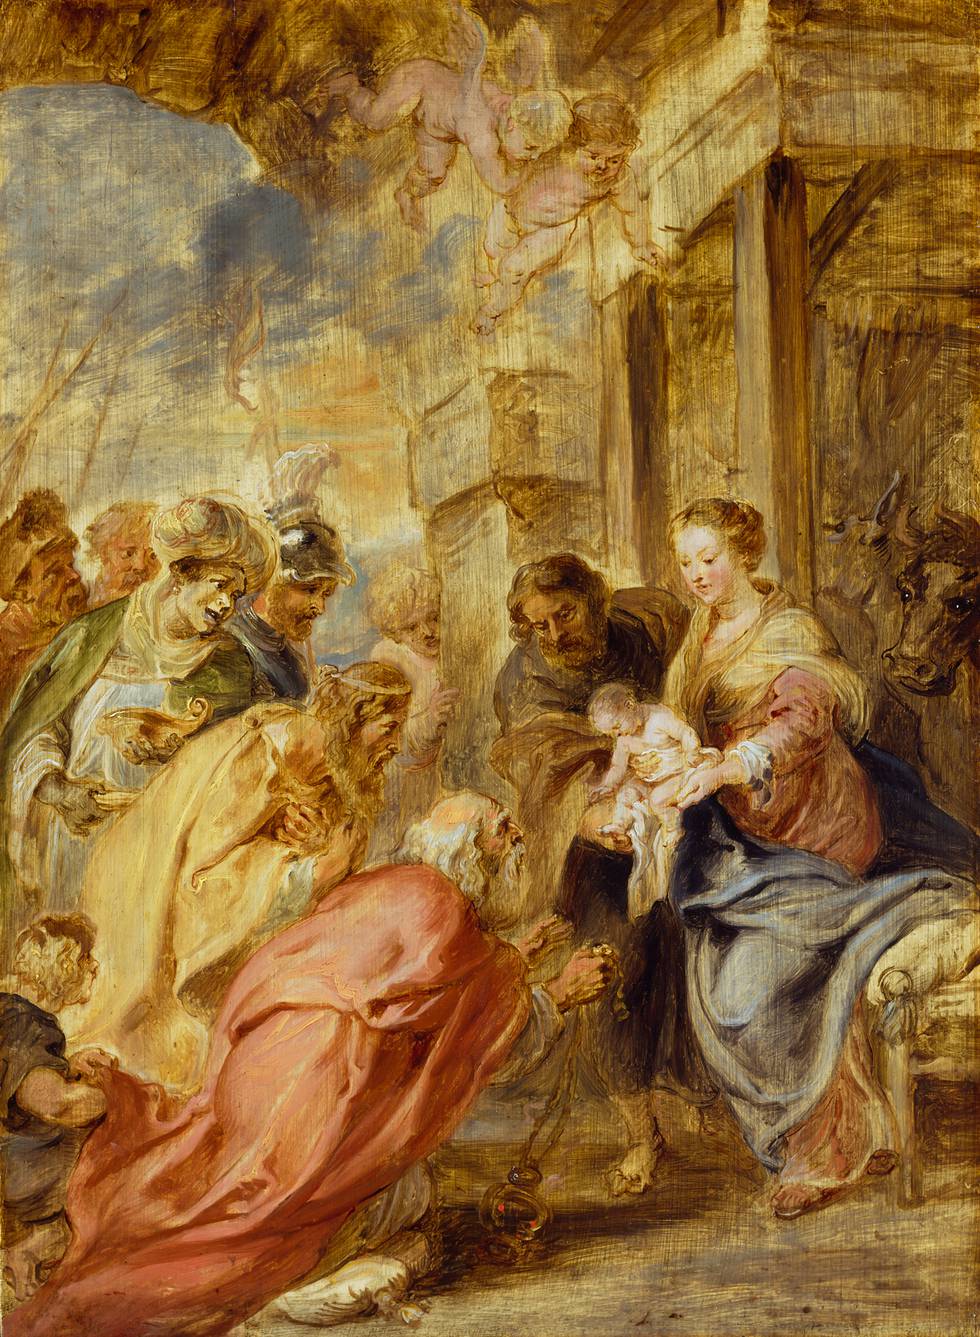 An oil sketch showing the Adoration of the Magi